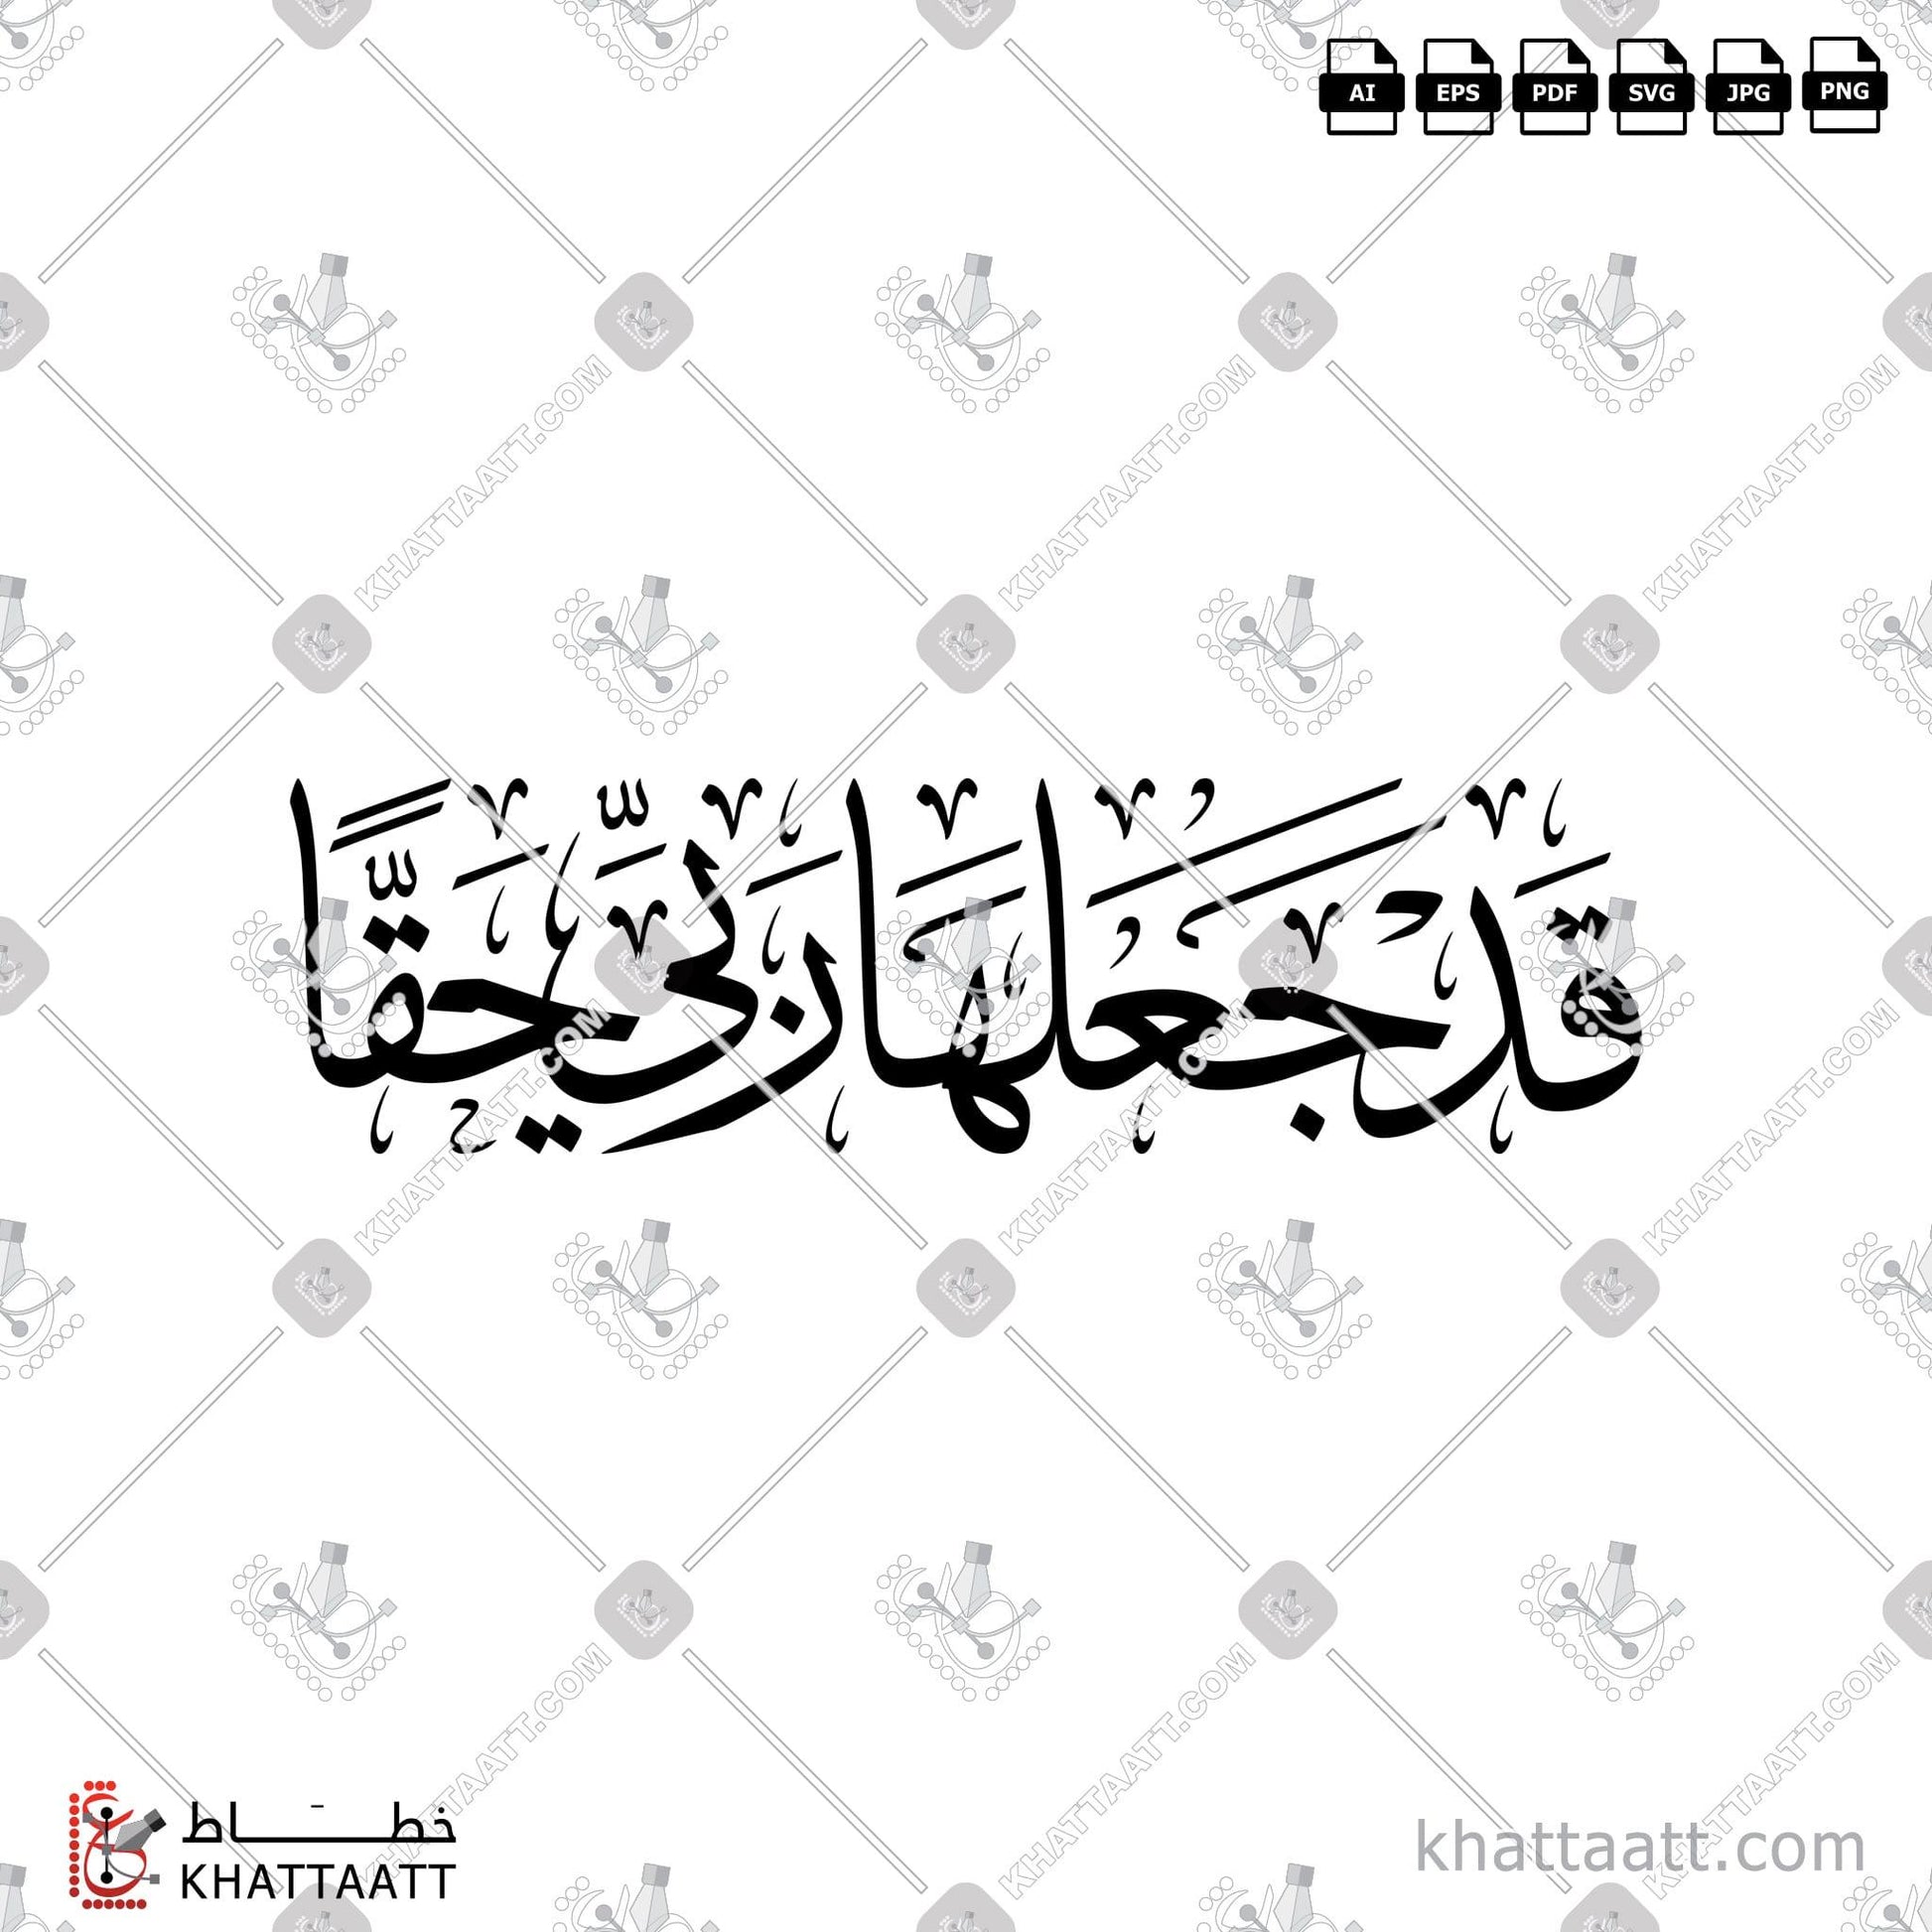 Download Arabic Calligraphy of قد جعلها ربي حقا in Thuluth - خط الثلث in vector and .png